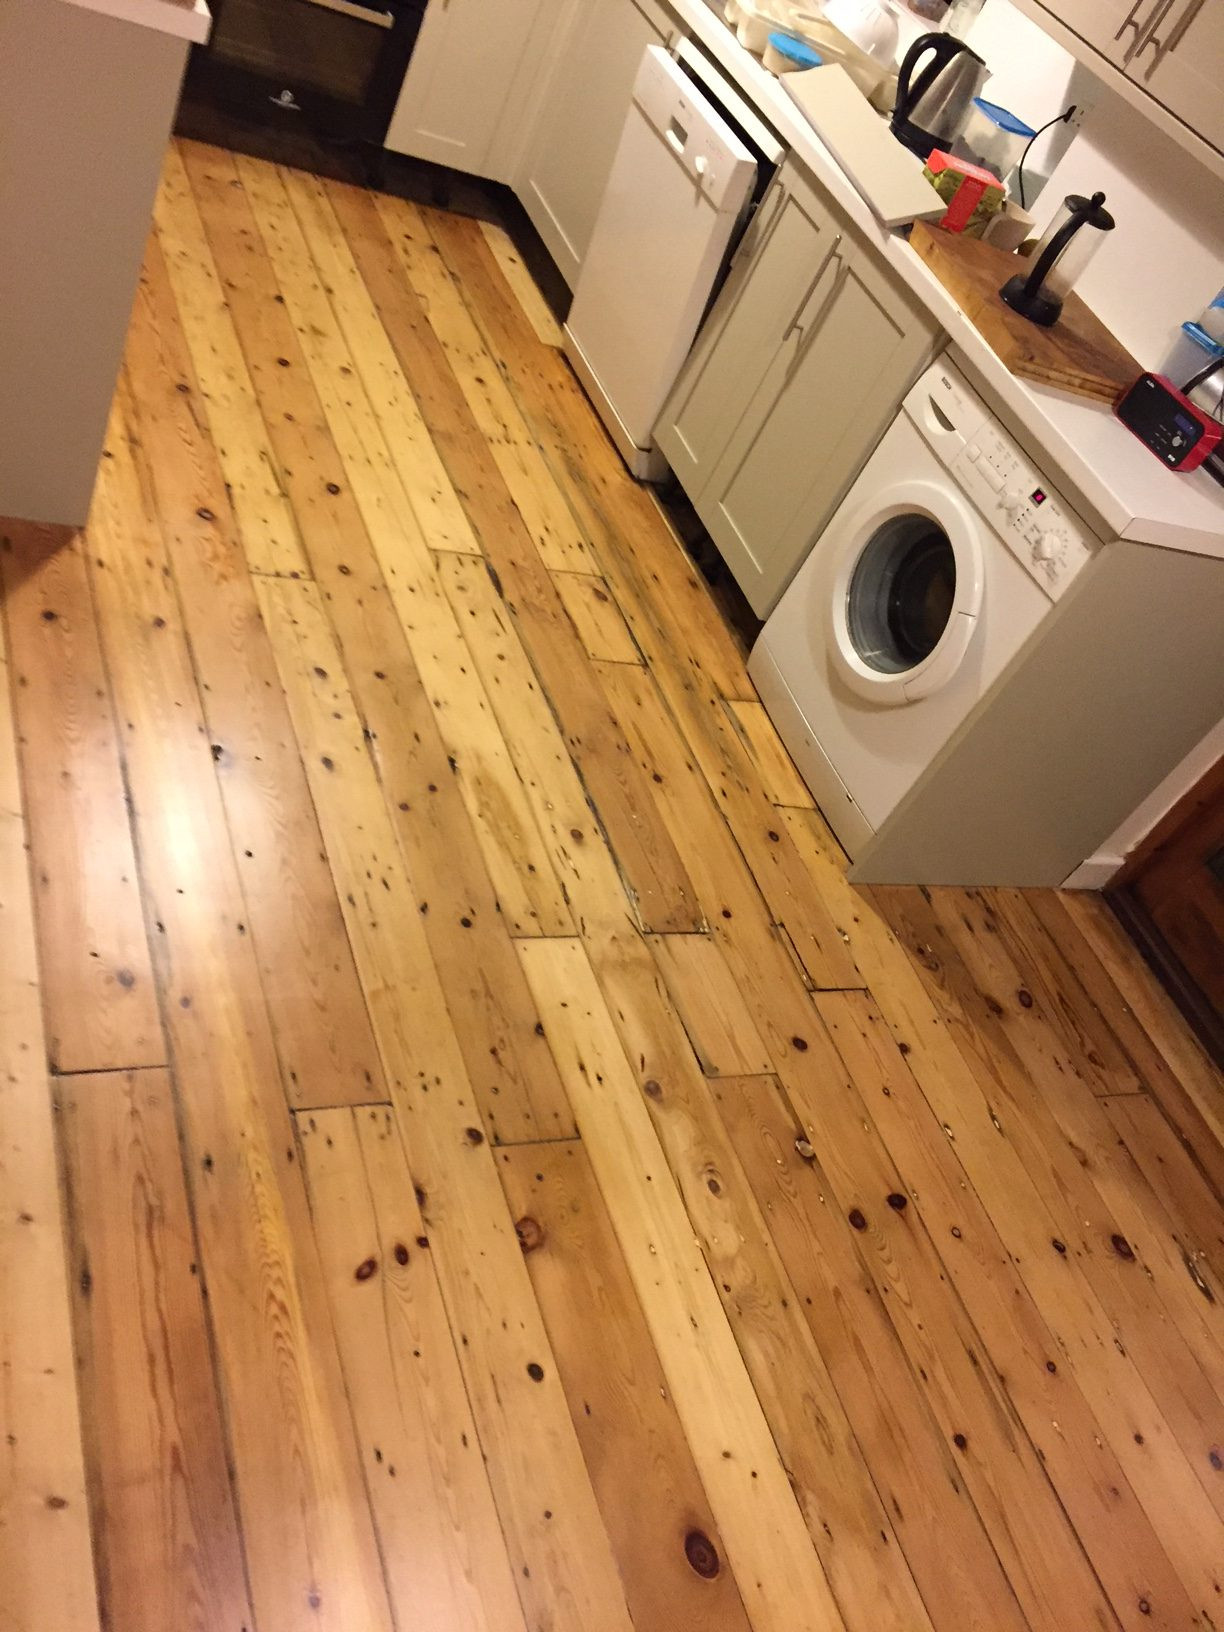 25 attractive Refinishing Red Oak Hardwood Floors 2022 free download refinishing red oak hardwood floors of how much to refinish wood floors adventures in staining my red oak pertaining to how much to refinish wood floors gallery priory wood floor restoration